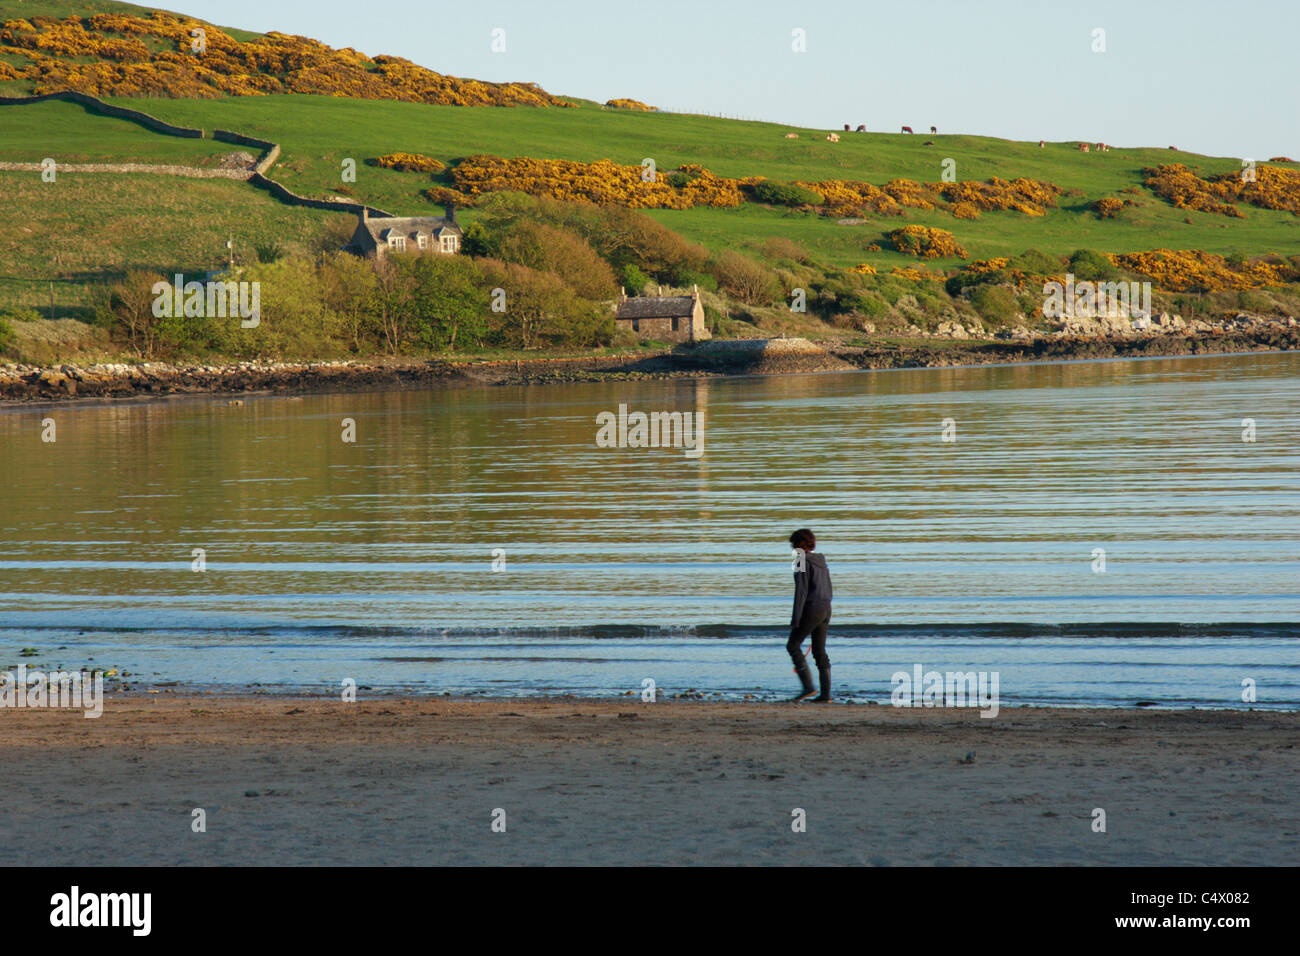 Man walking on sandy beach at Brighouse Bay near Kirkcudbright, Dumfries and Galloway, Scotland Stock Photo